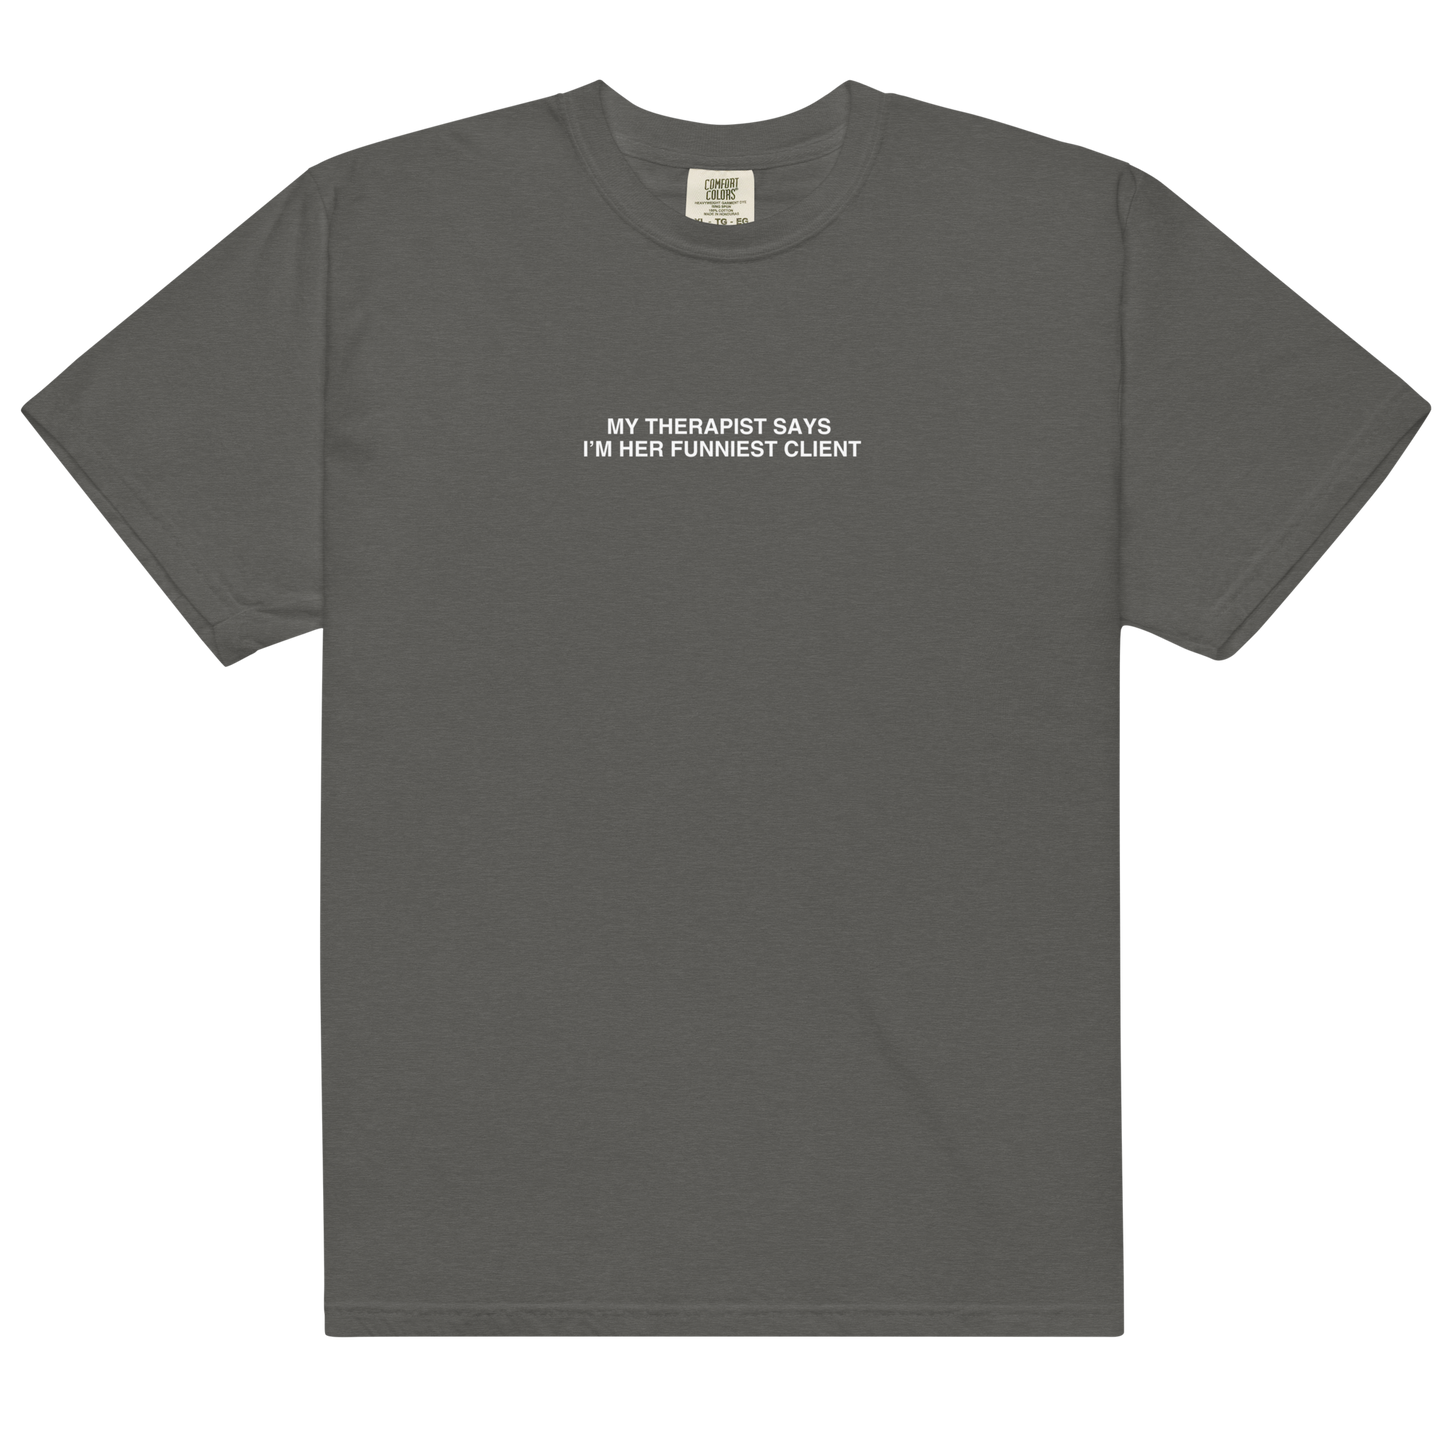 We Used to Talk (Bye Theatre) T-Shirt